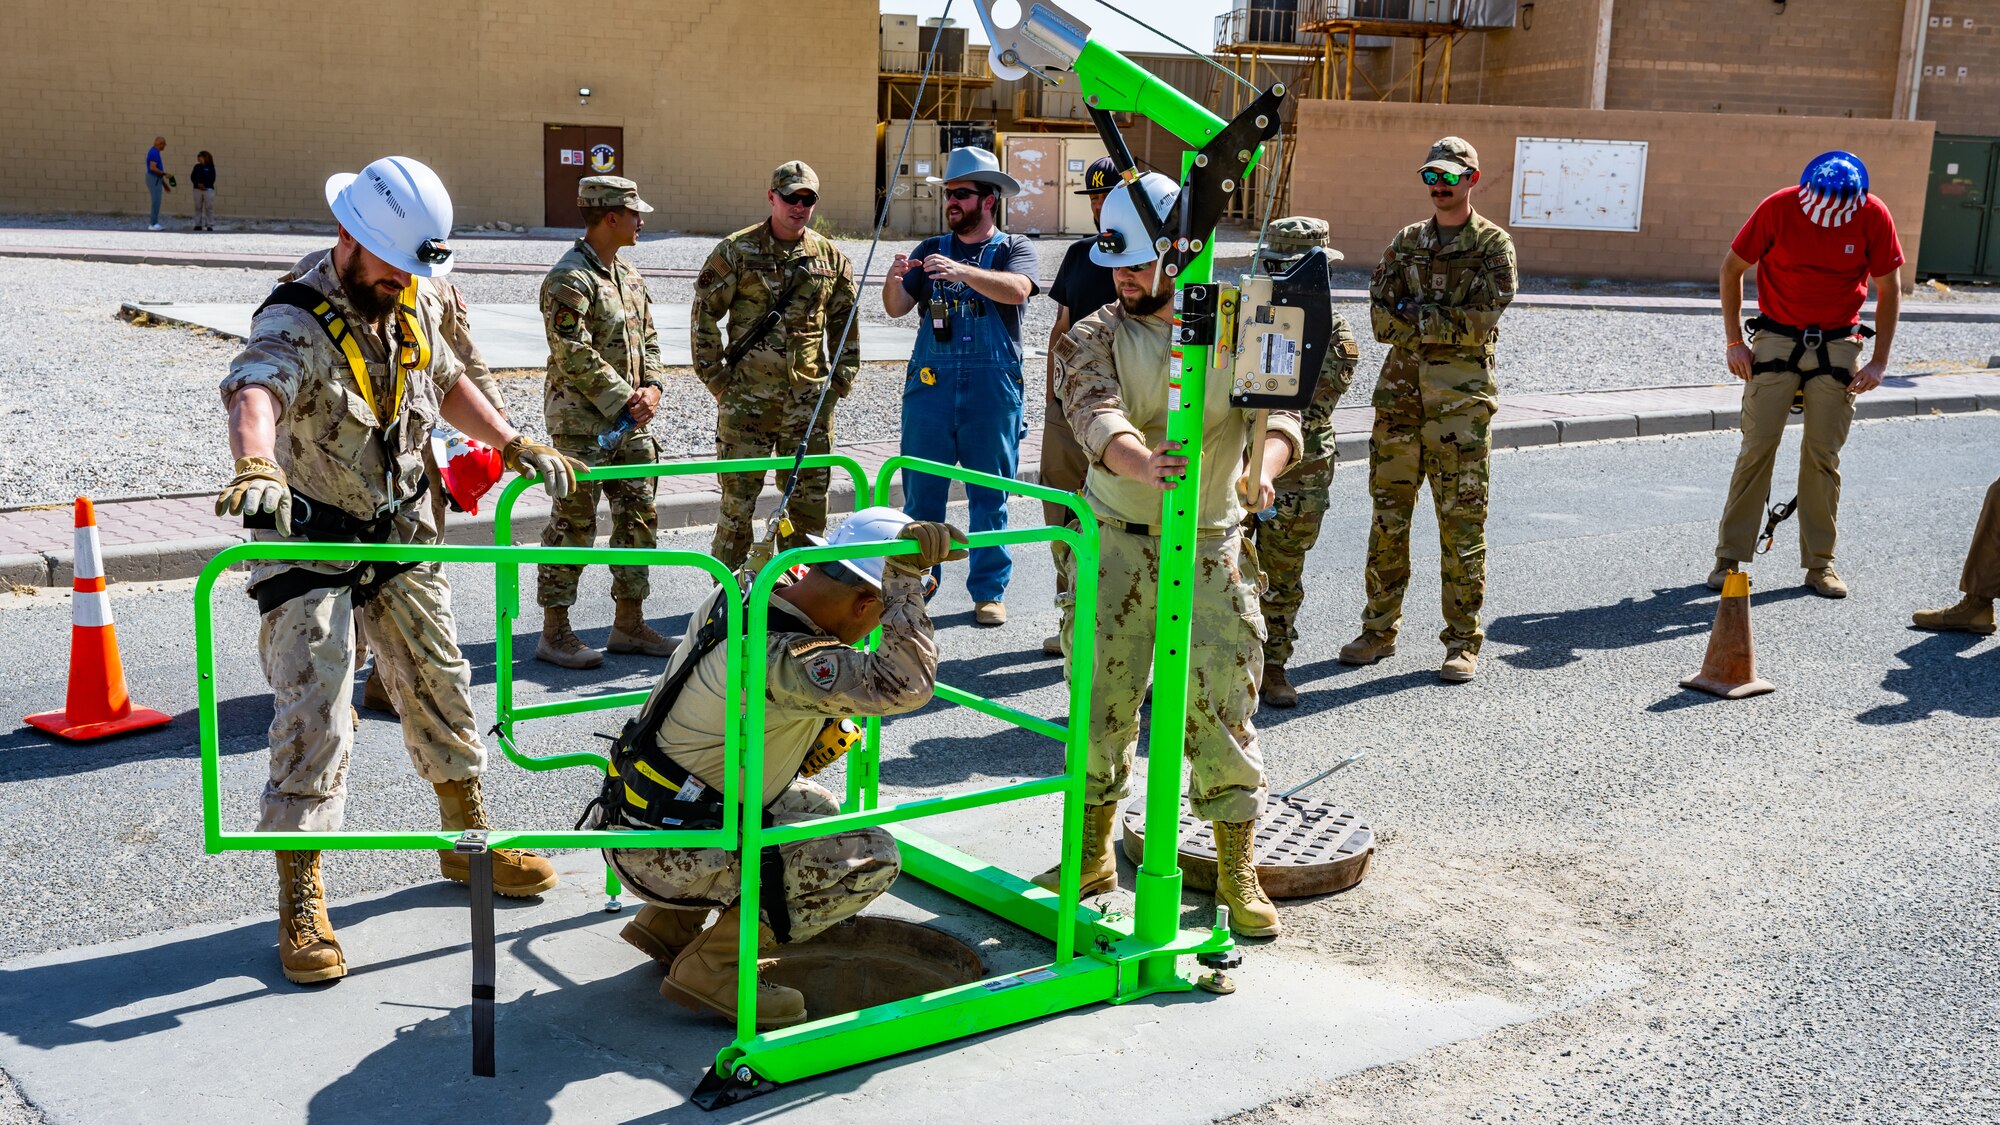 Canadian armed forces members demonstrate how their confined-space pulley system works during confined-space training at Ali Al Salem Air Base, Kuwait, July 25, 2023. This confined-space training allowed for the U.S. and our Canadian partners to share their knowledge and expertise, thus reducing the risks associated with confined-space operations for all. (U.S. Air Force photo by Staff Sgt. Kevin Long)